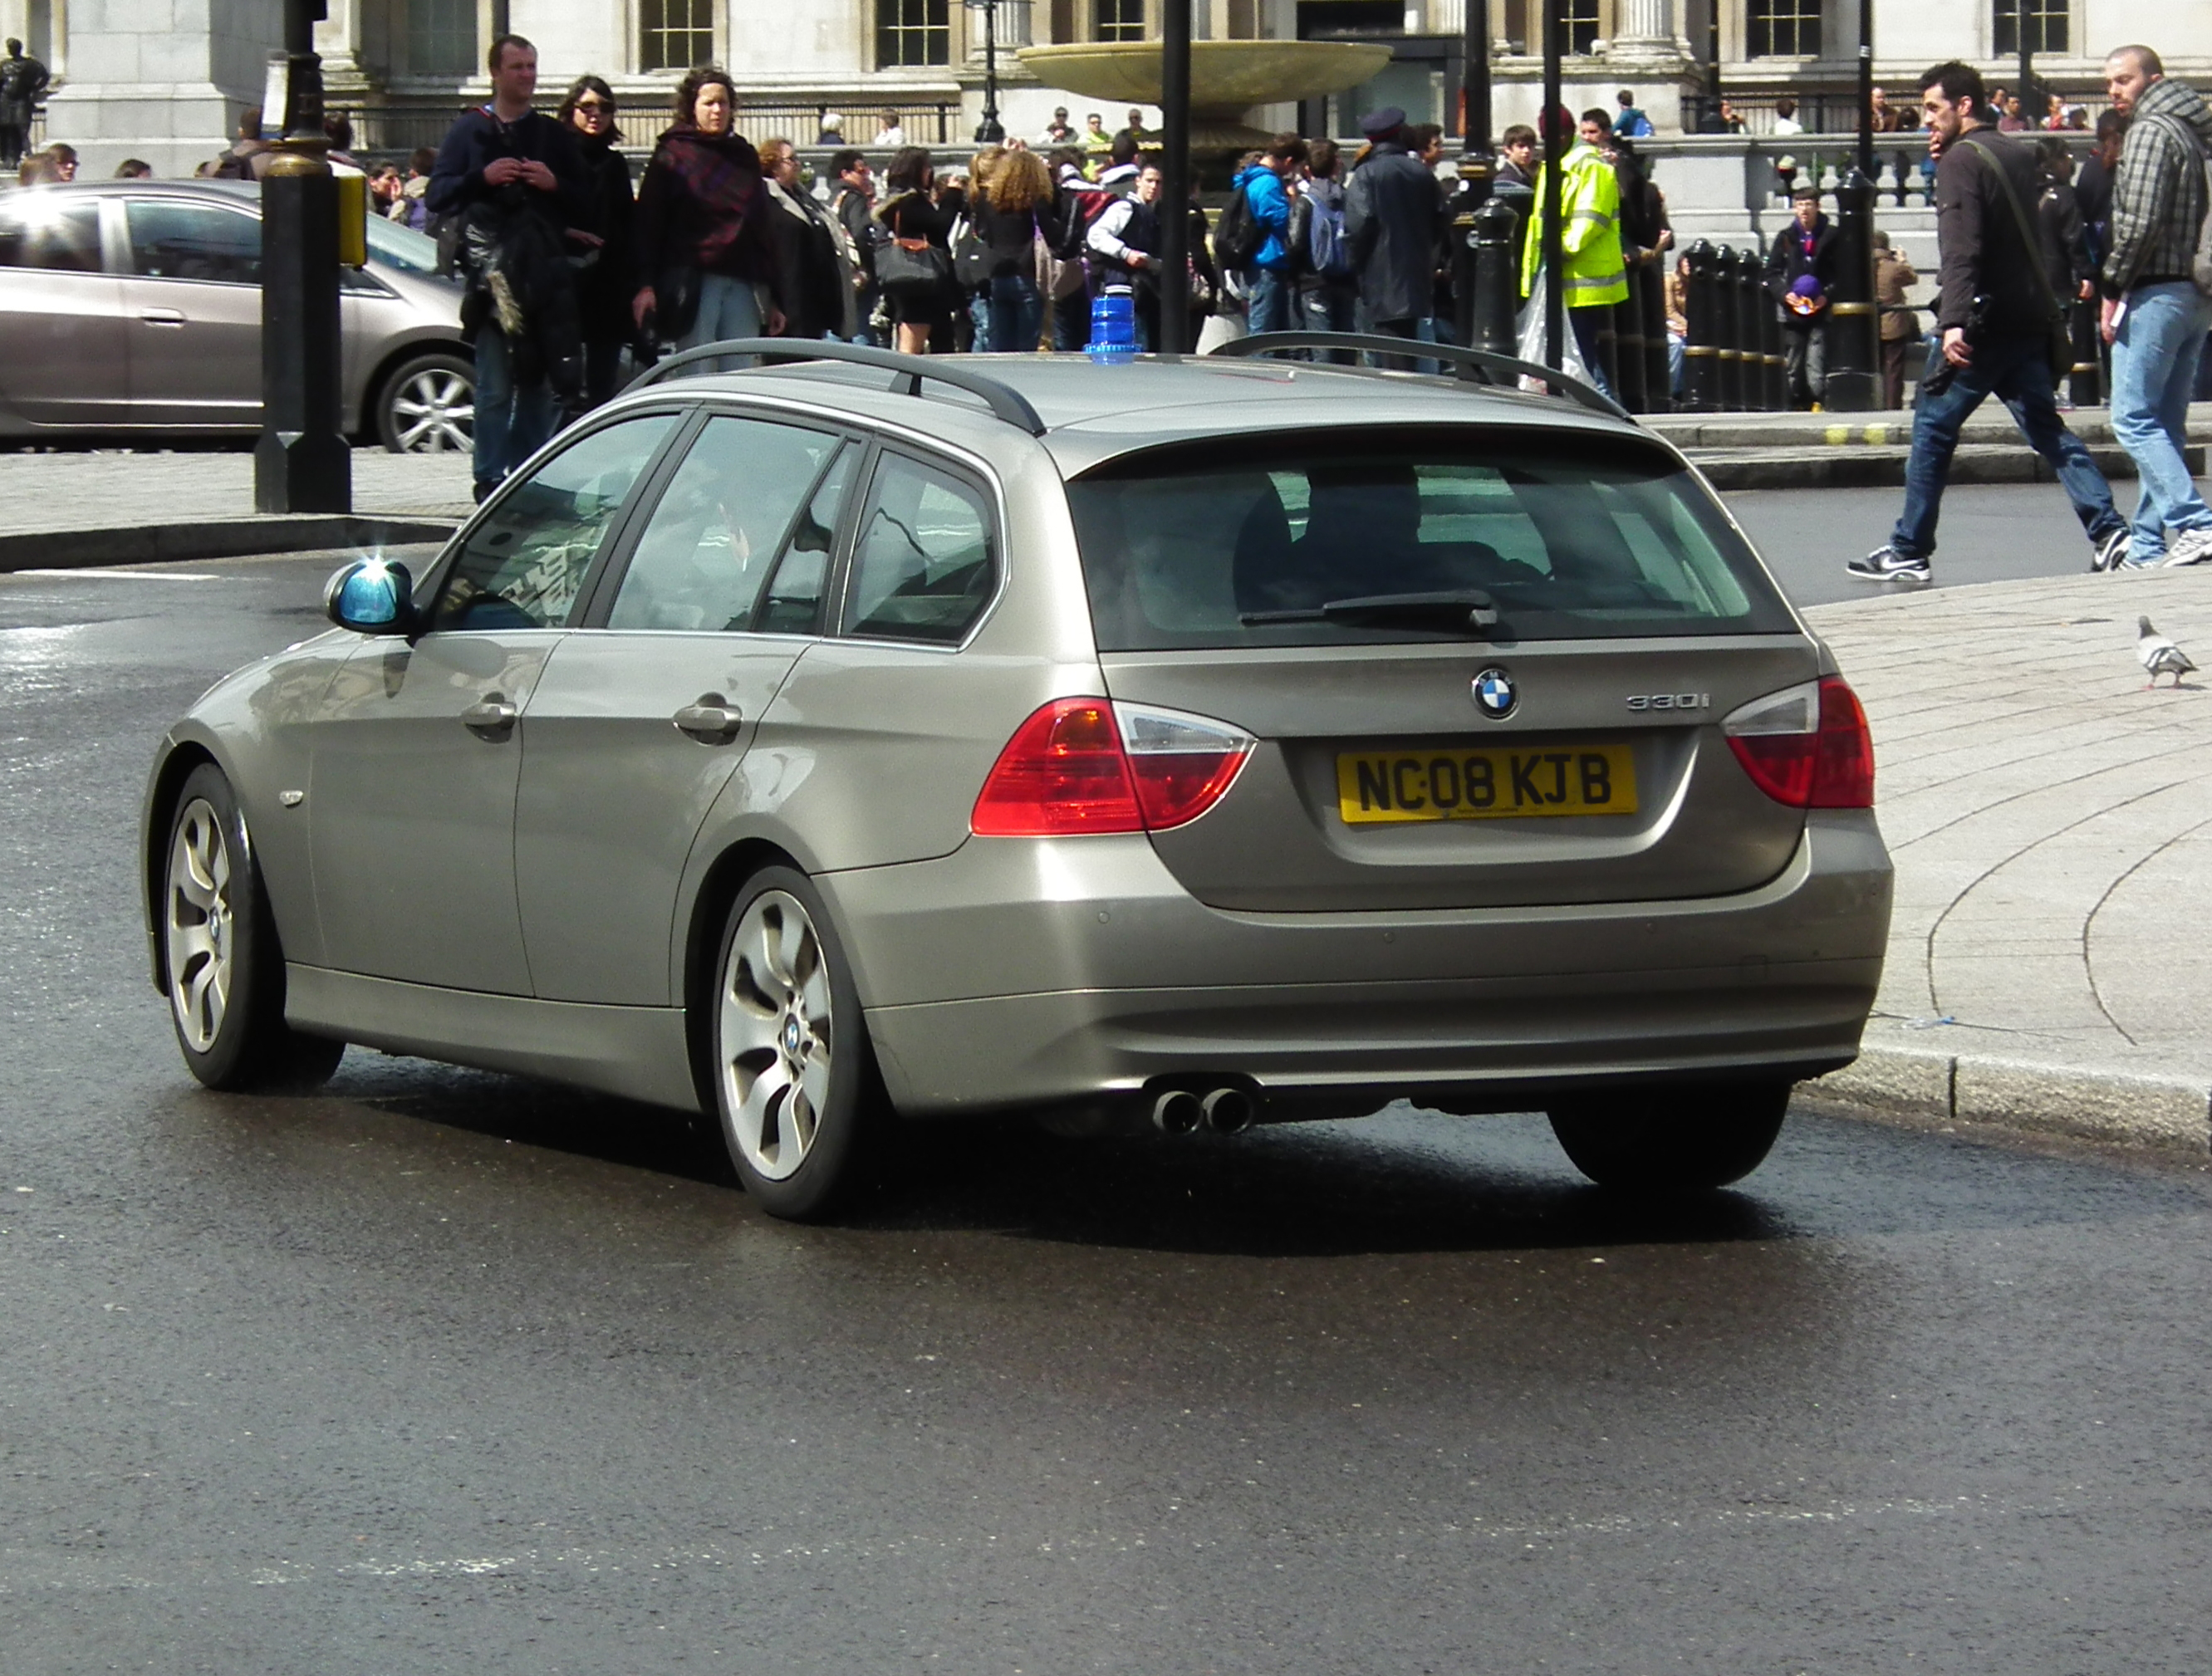 Unmarked BMW 330i Touring | Flickr - Photo Sharing!